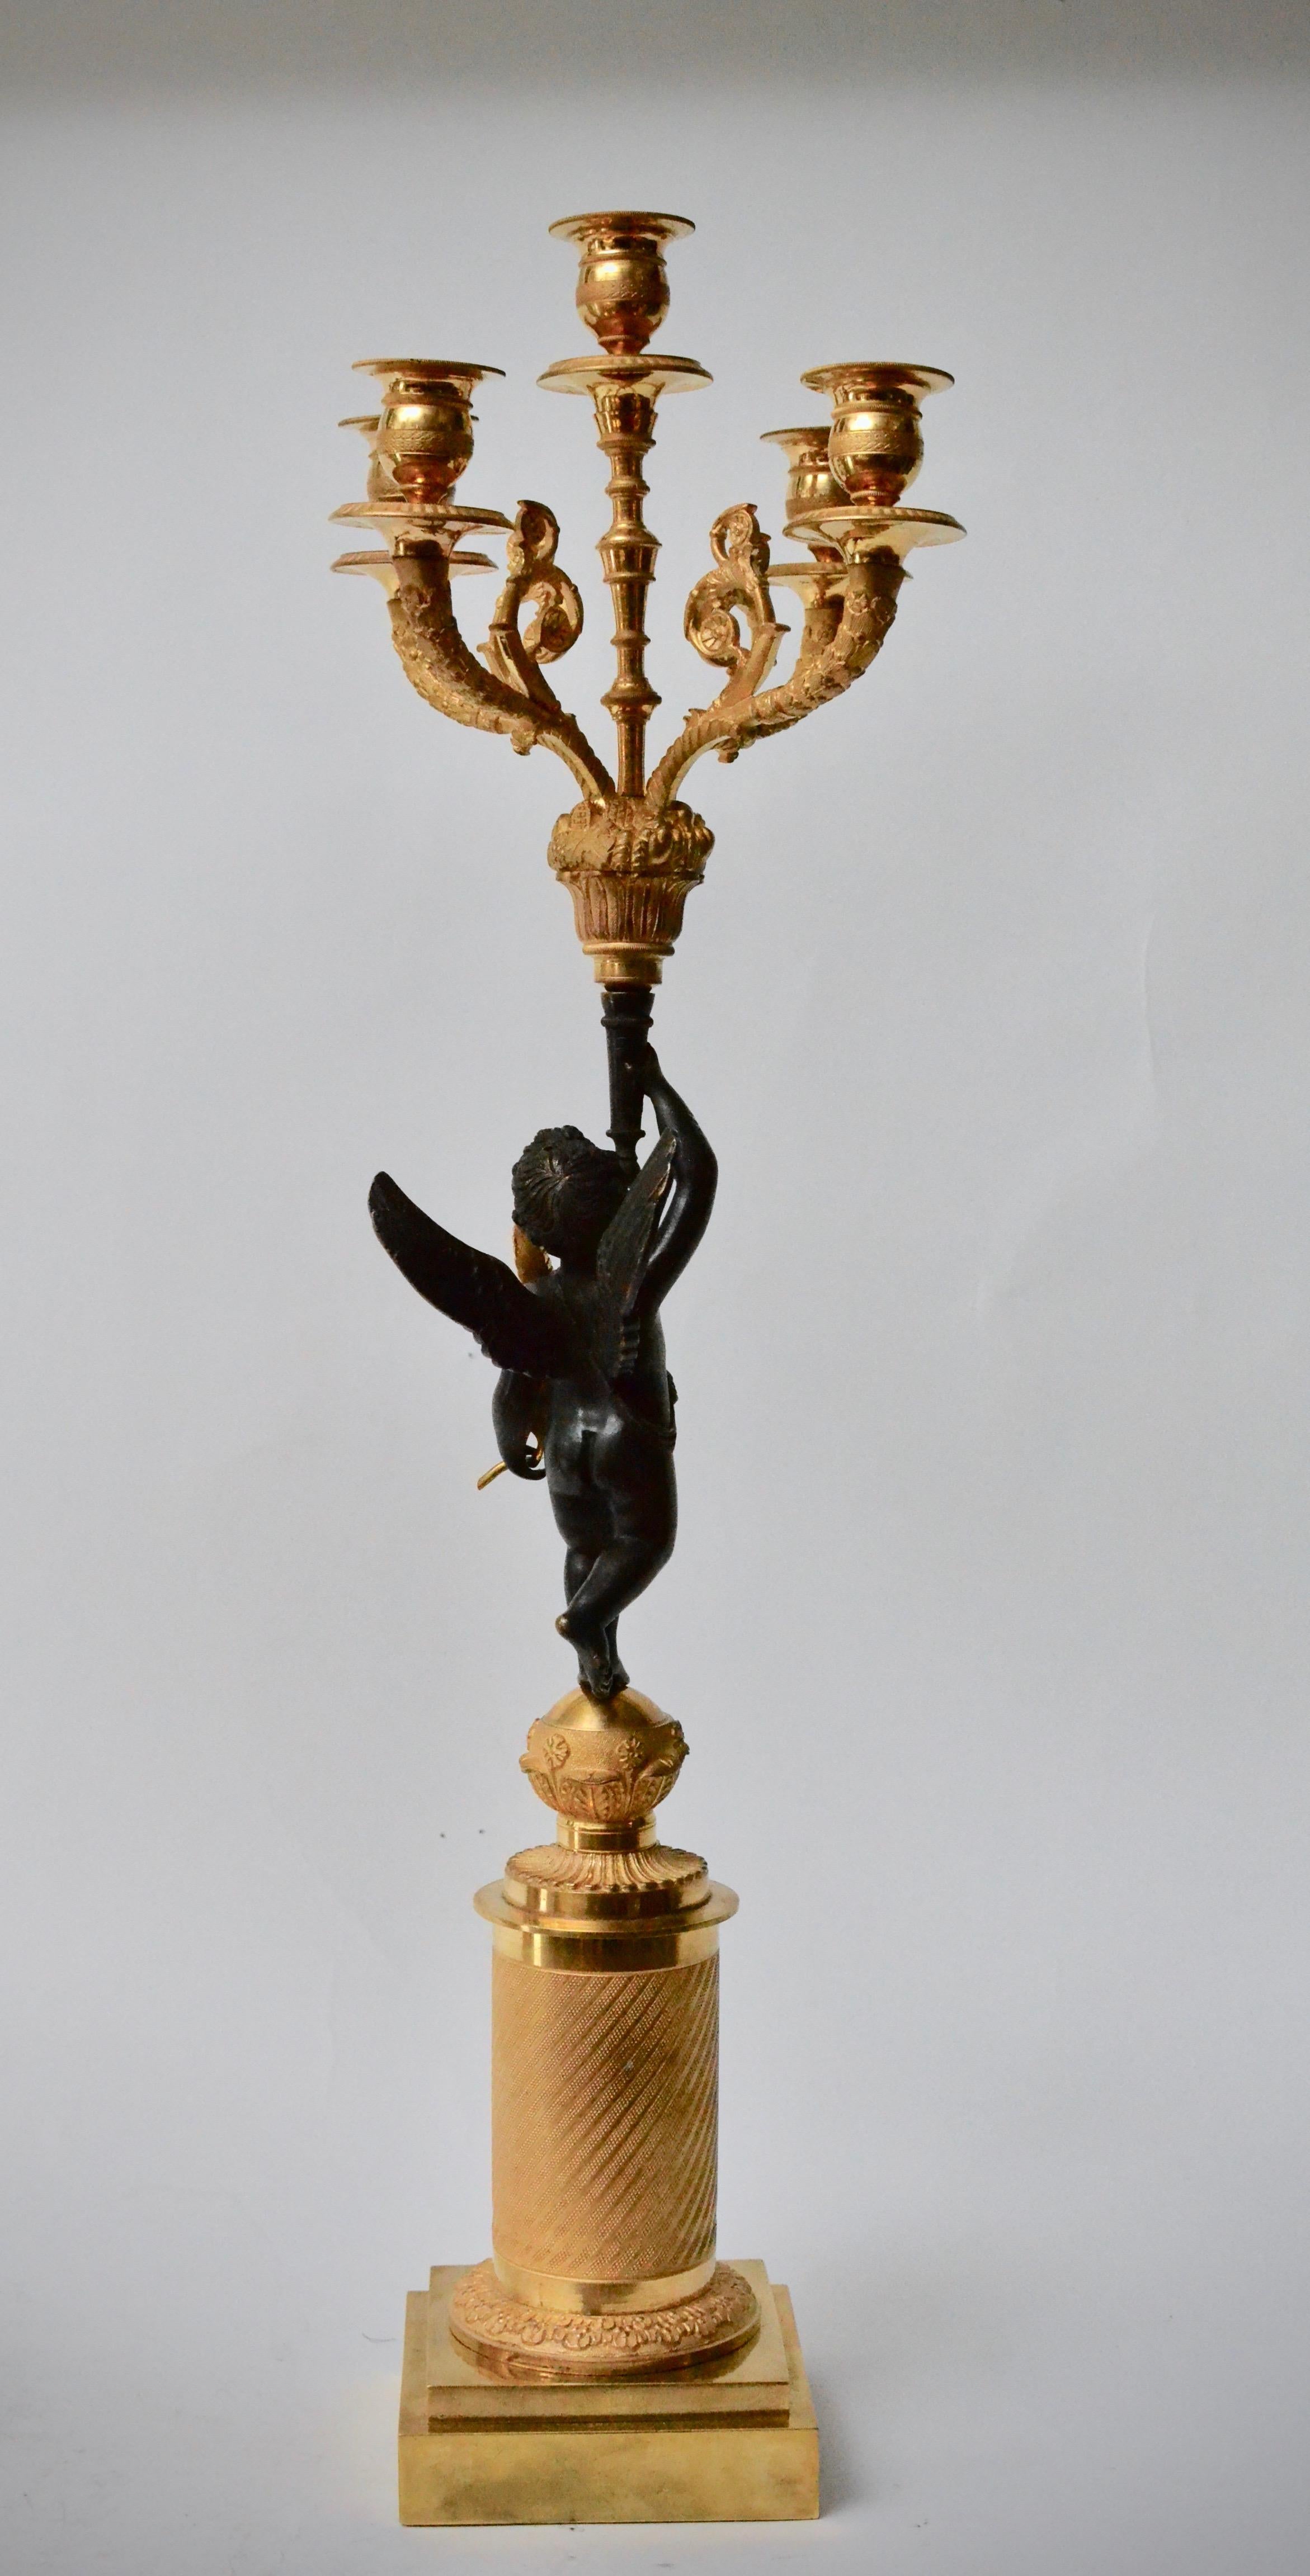 French Pair of Gilt and Patinated Empire Candelabra, Early 19th Century